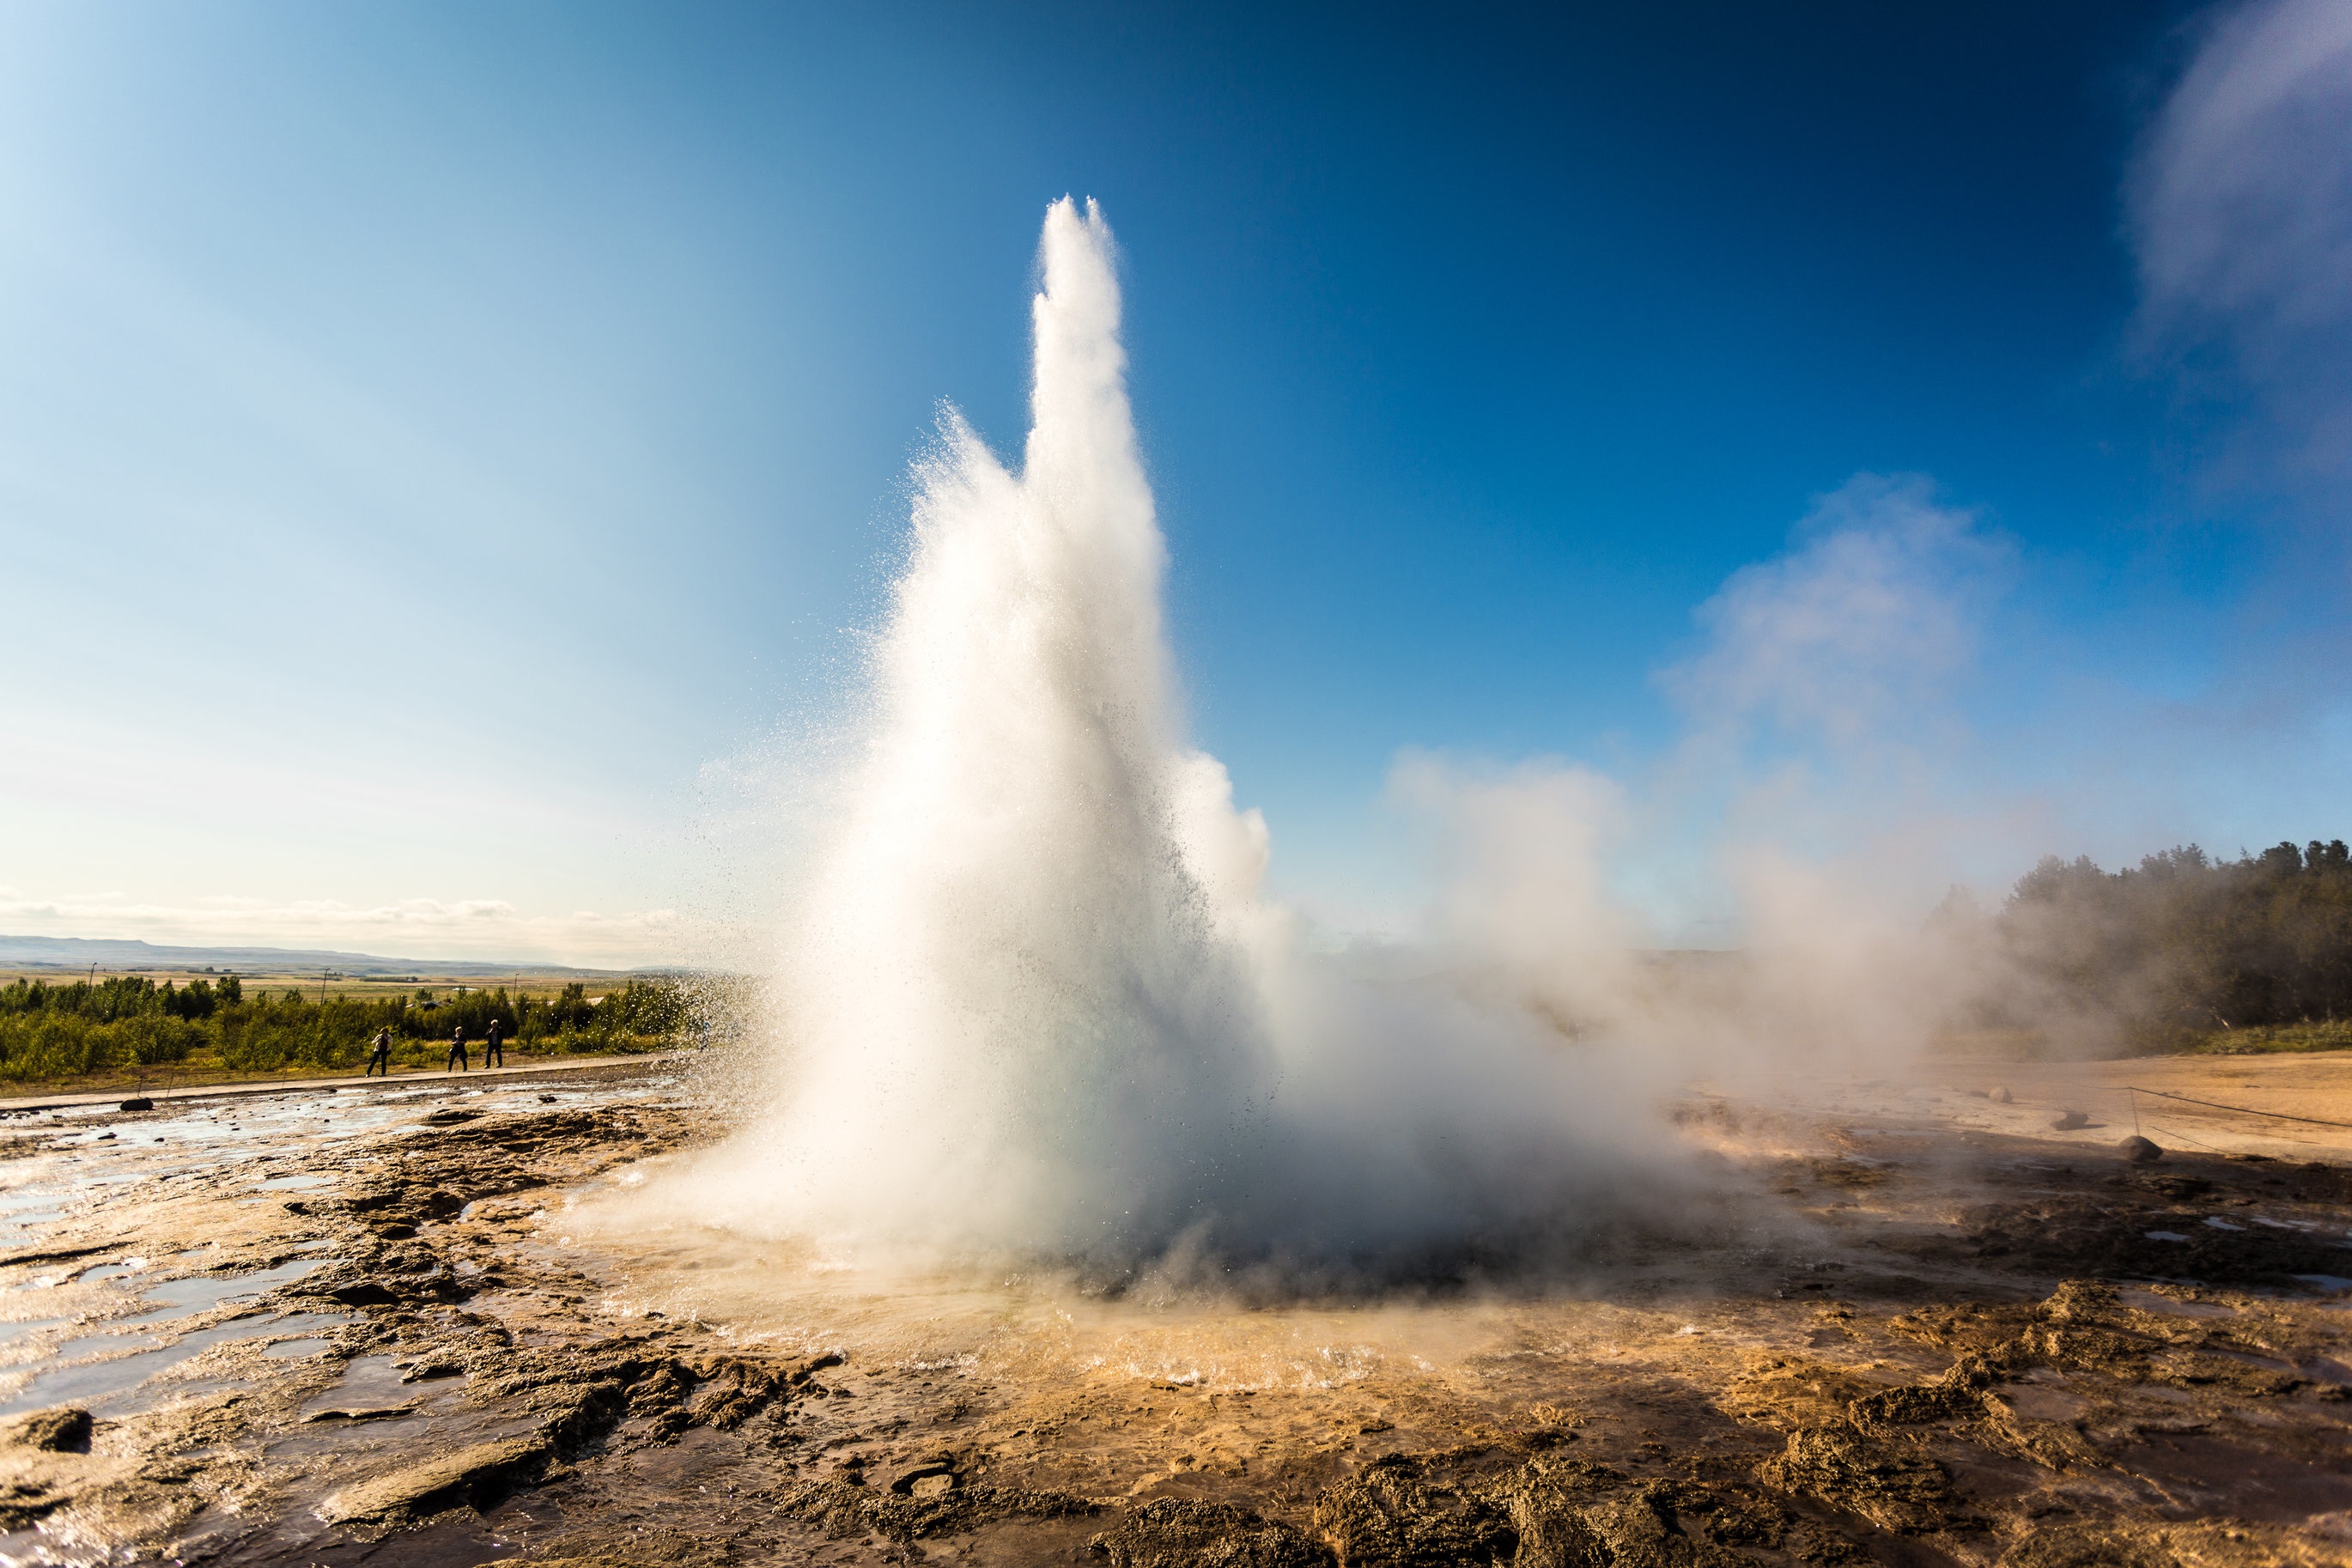 Every five to ten minutes, the geyser Strokkur blasts water to heights that can exceed 40 m (130 ft).